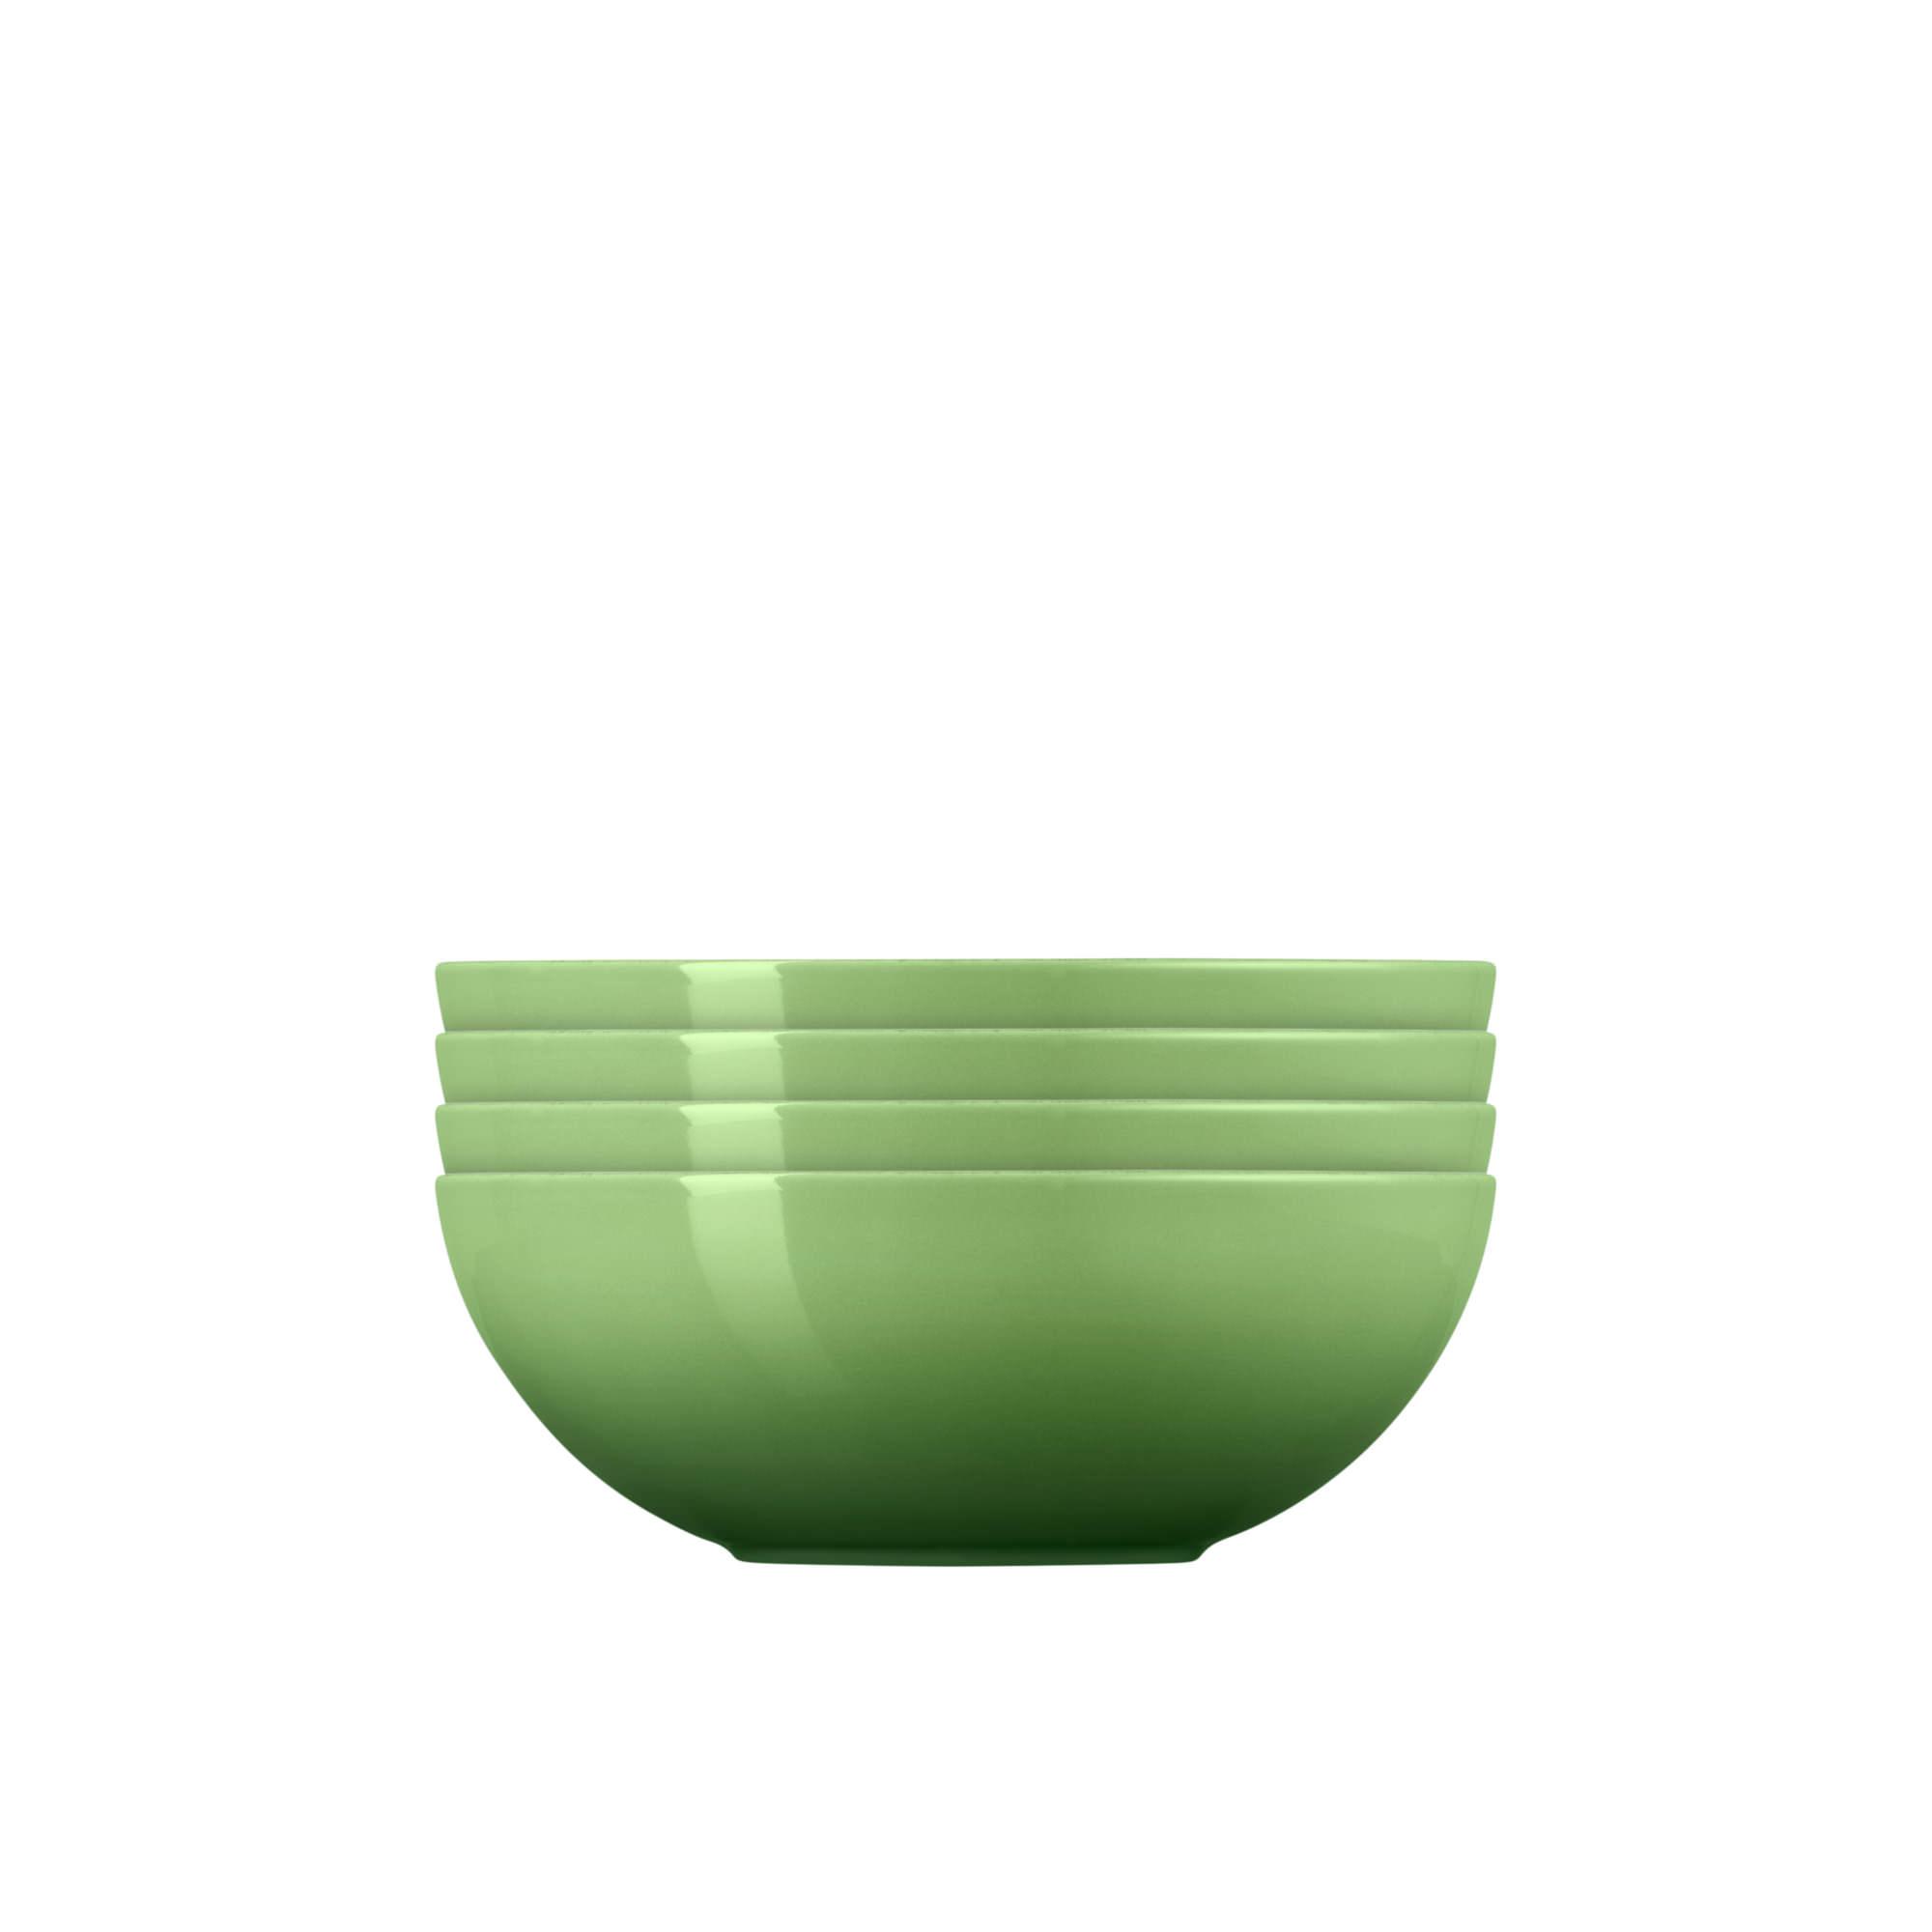 Le Creuset Stoneware Cereal Bowl Set of 4 Bamboo Green Image 4